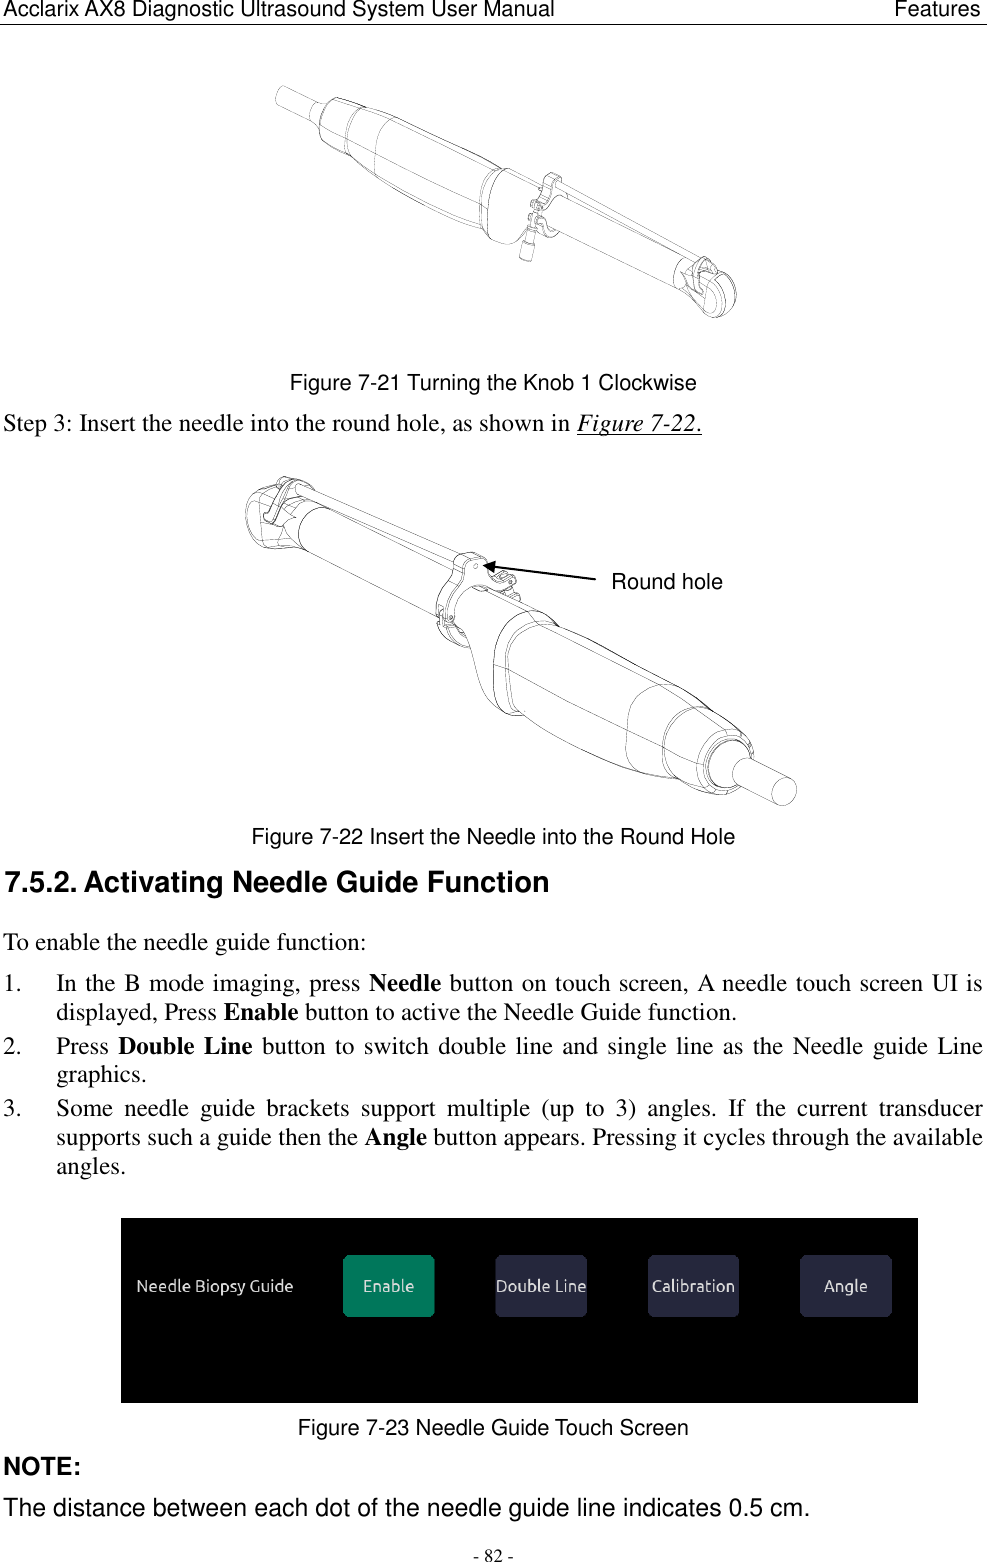 Acclarix AX8 Diagnostic Ultrasound System User Manual                                                              Features - 82 -  Figure 7-21 Turning the Knob 1 Clockwise Step 3: Insert the needle into the round hole, as shown in Figure 7-22.  Figure 7-22 Insert the Needle into the Round Hole 7.5.2. Activating Needle Guide Function To enable the needle guide function: 1. In the B mode imaging, press Needle button on touch screen, A needle touch screen UI is displayed, Press Enable button to active the Needle Guide function. 2. Press Double Line button to switch double line and single line as the Needle guide Line graphics. 3. Some  needle  guide  brackets  support  multiple  (up  to  3)  angles.  If  the  current  transducer supports such a guide then the Angle button appears. Pressing it cycles through the available angles.   Figure 7-23 Needle Guide Touch Screen NOTE:   The distance between each dot of the needle guide line indicates 0.5 cm. Round hole 